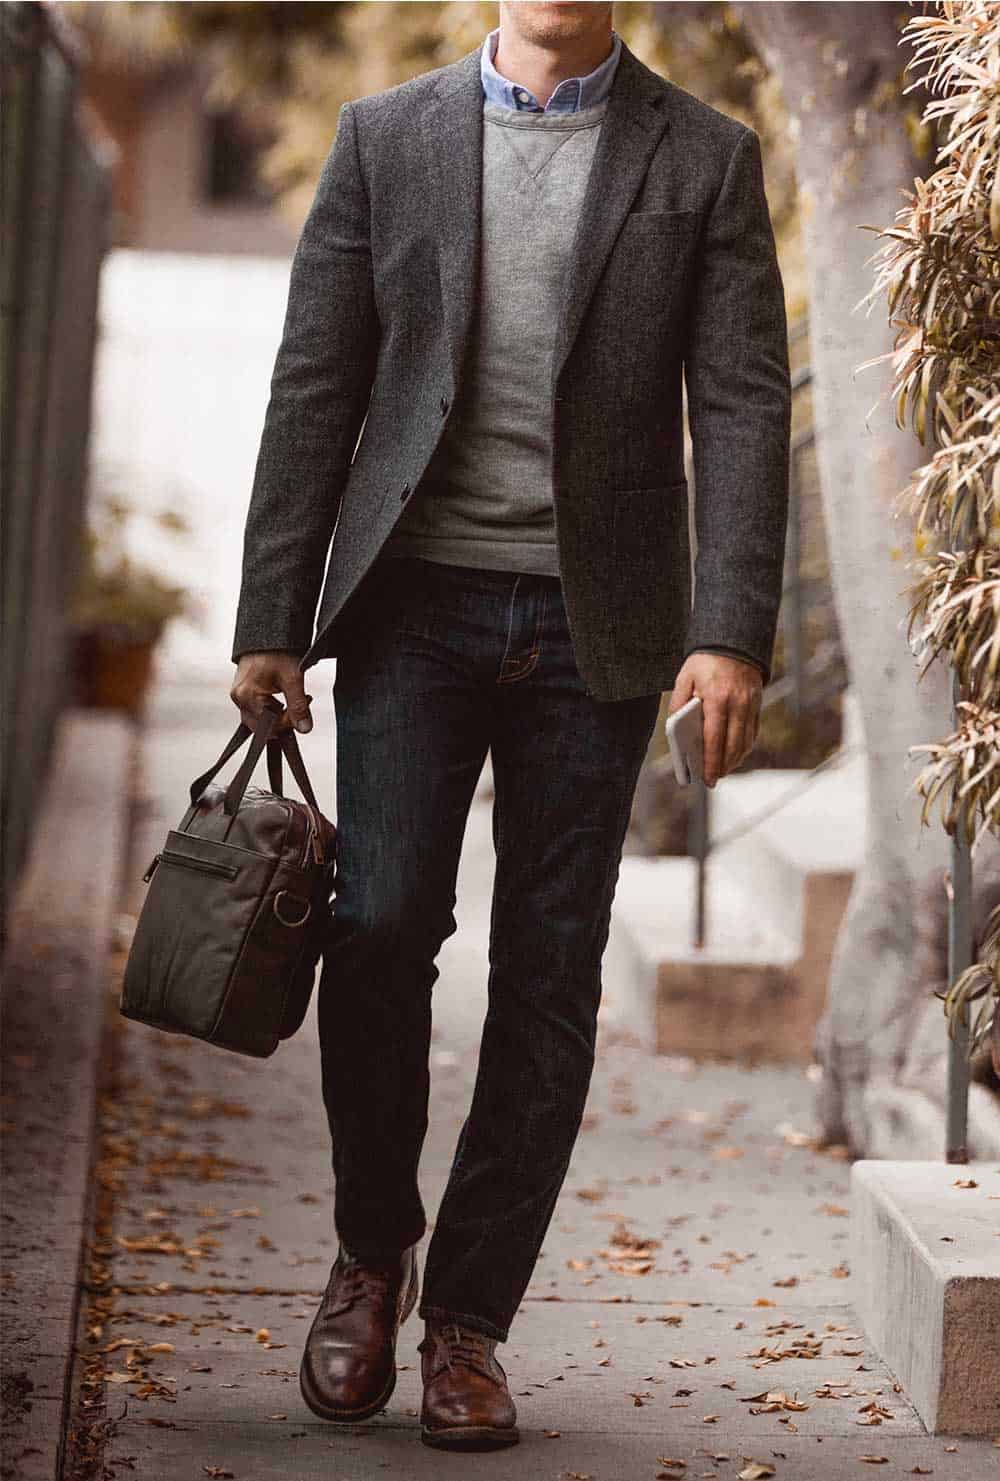 A man wearing a sportcoat and brown shoes walking on a sidewalk